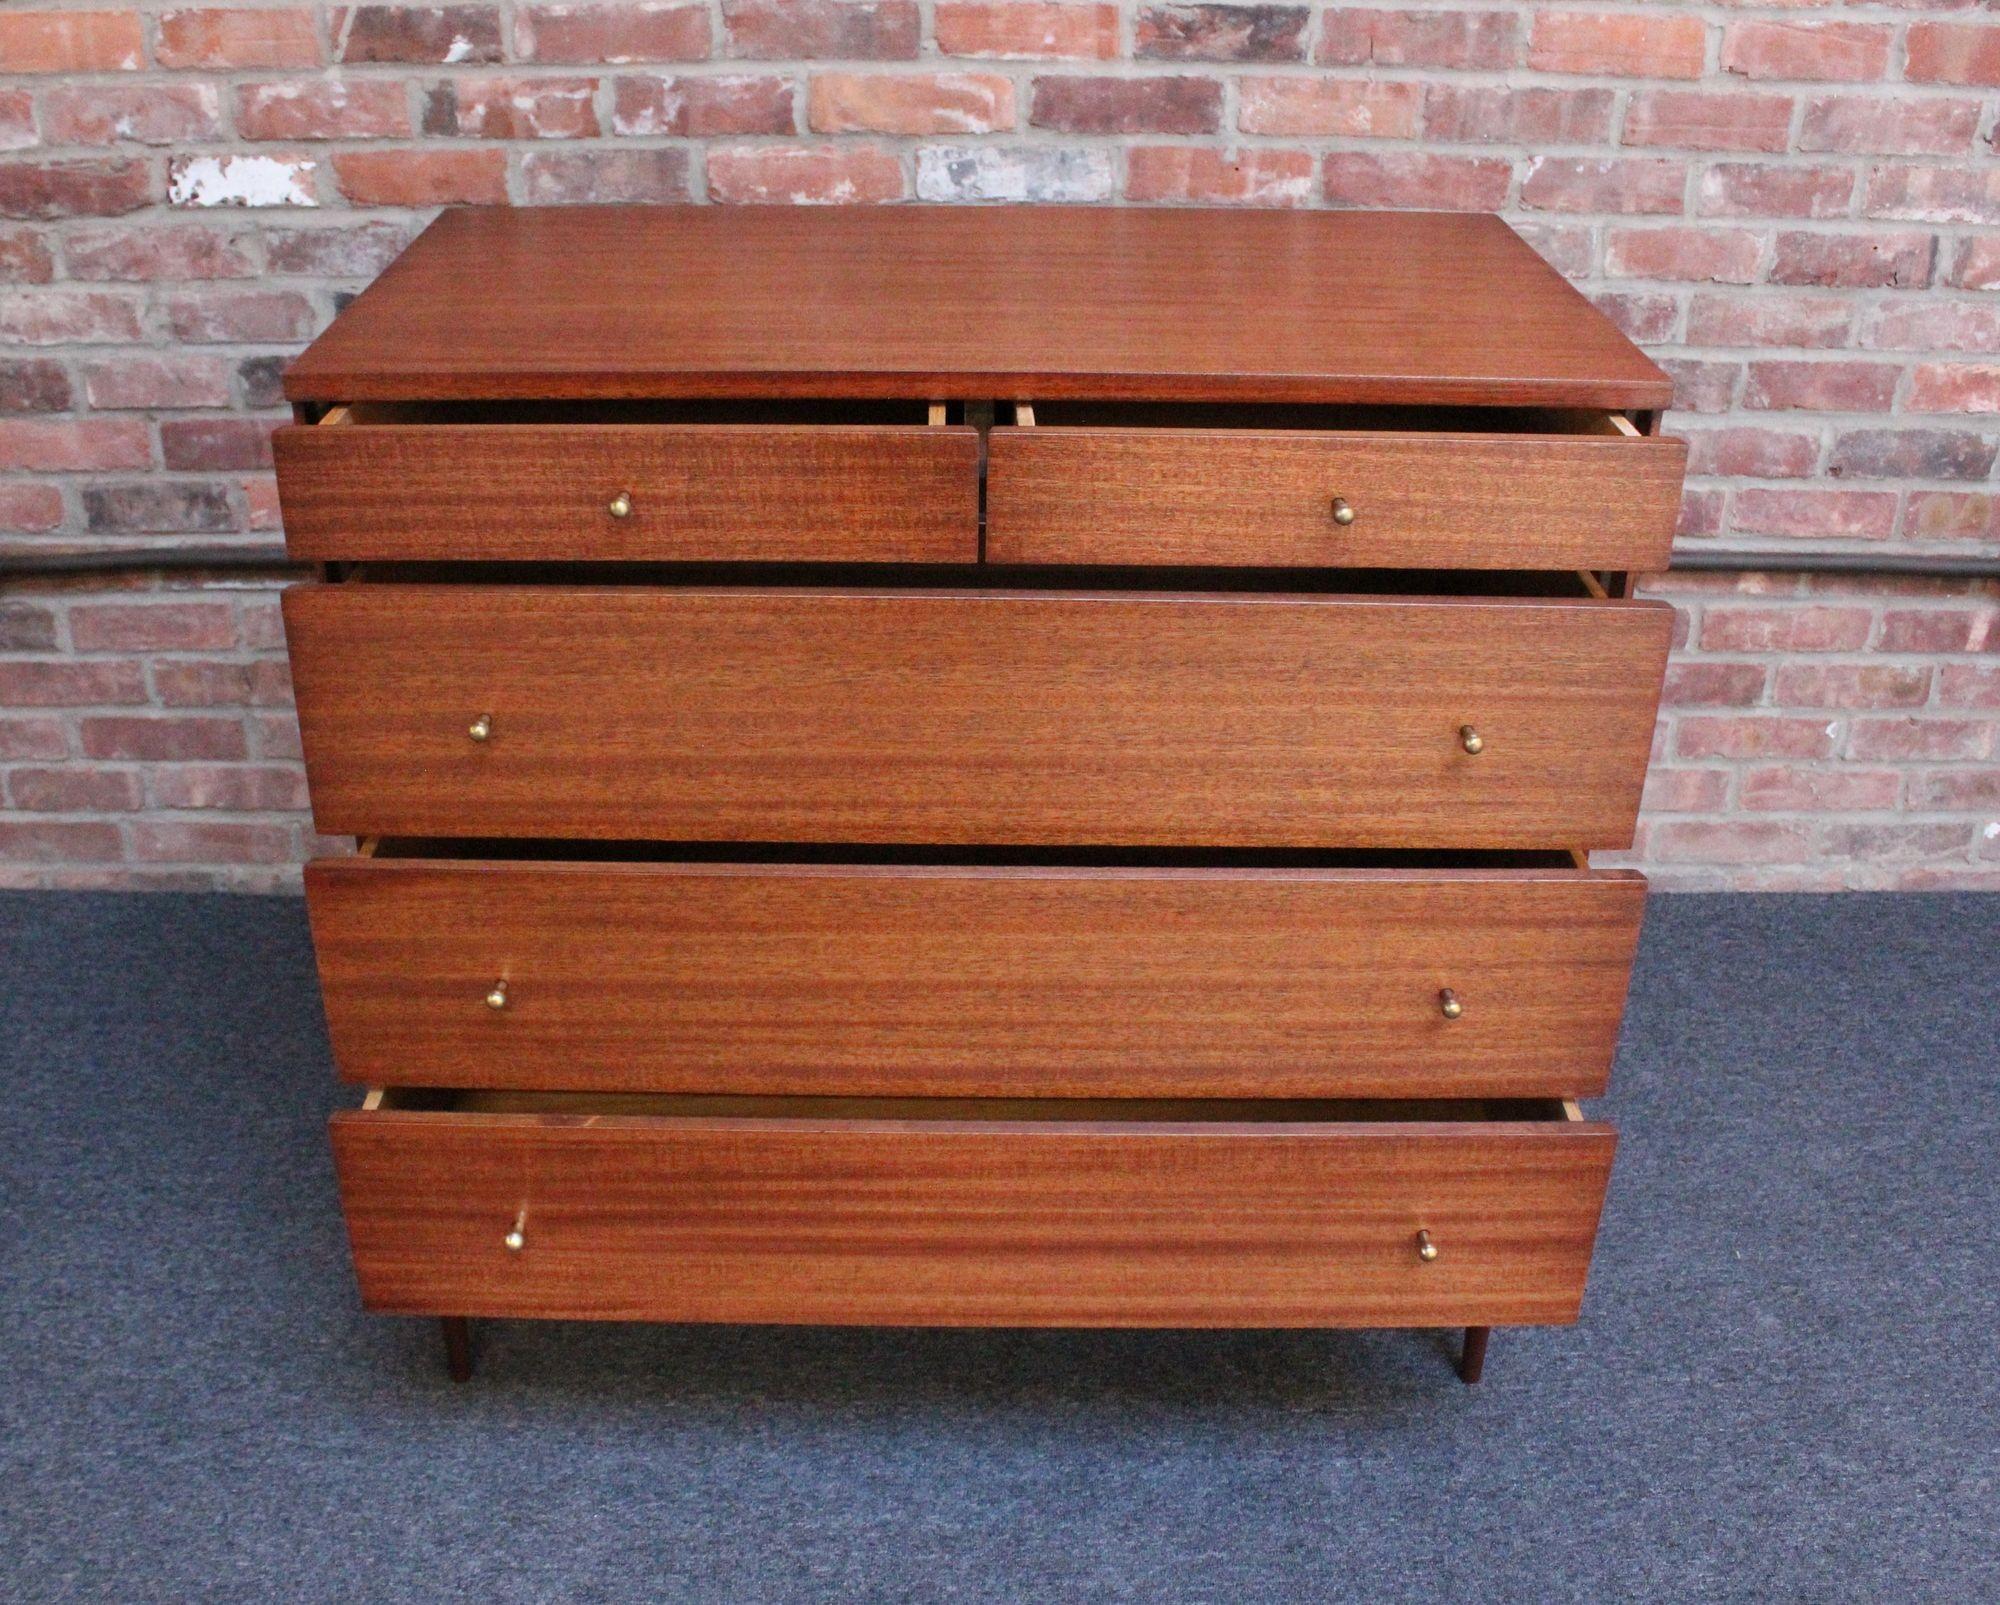 American Paul Mccobb Calvin Group Mahogany and Brass Five-Drawer Chest / Dresser